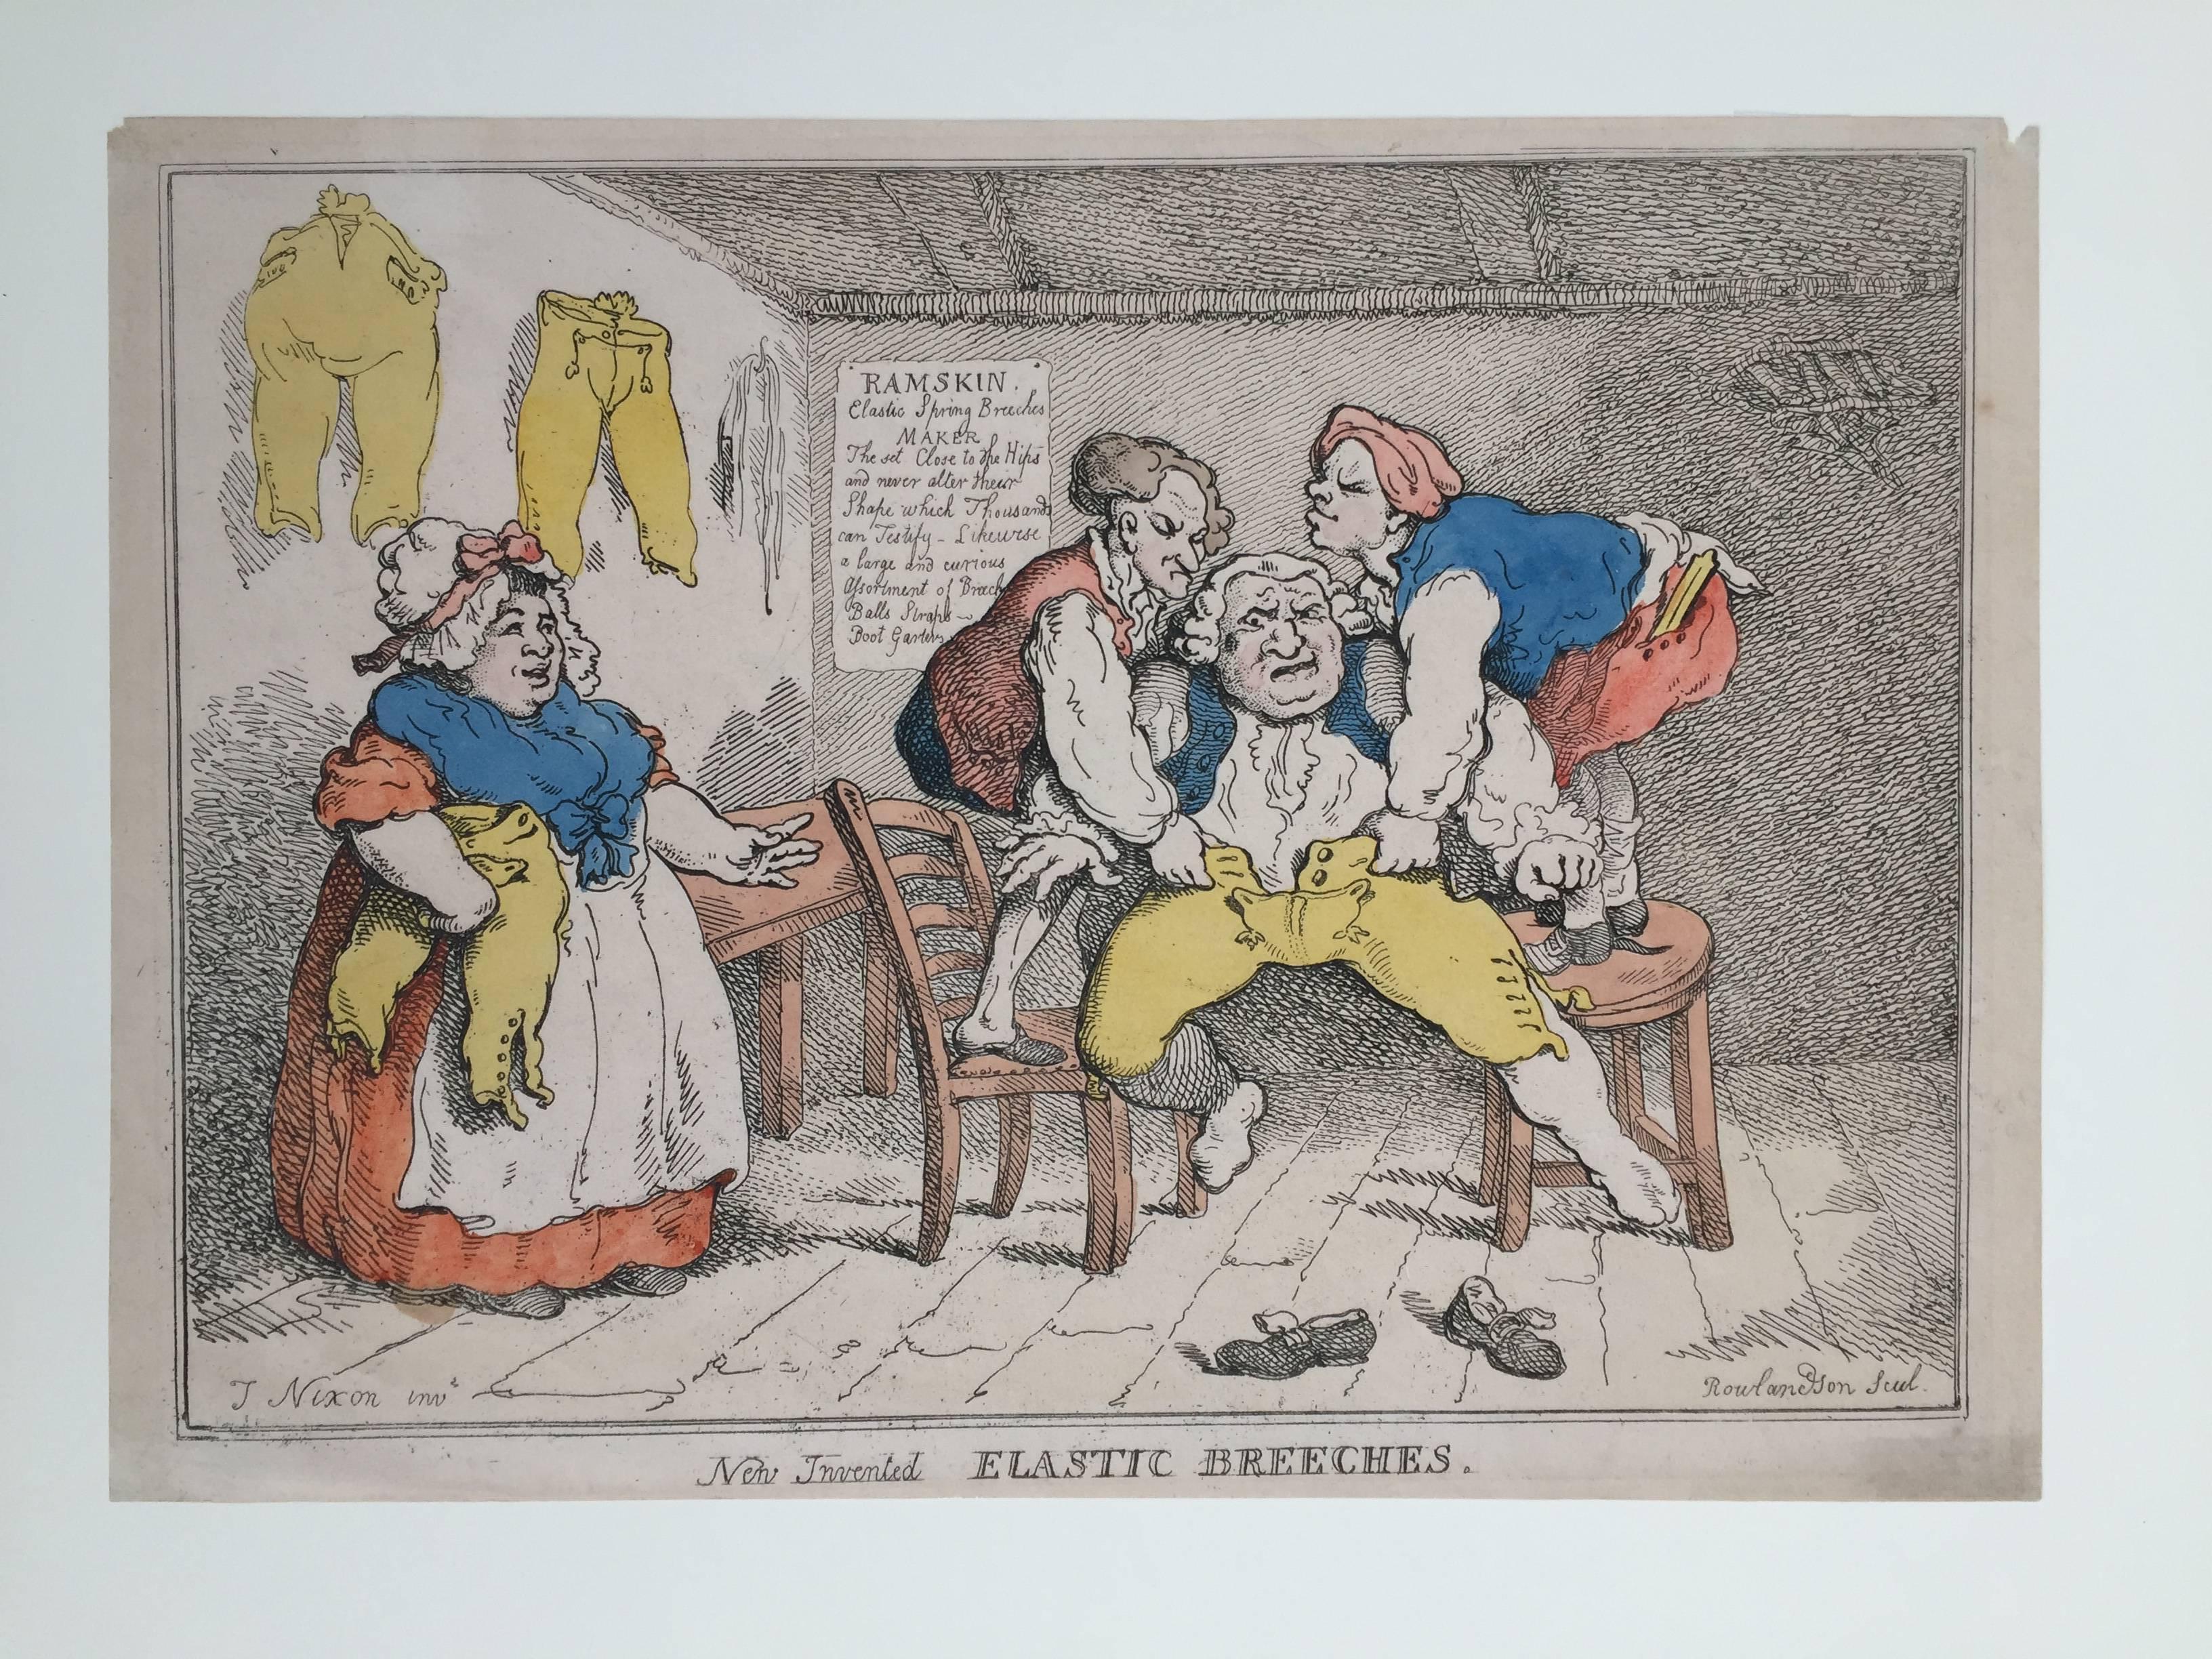 NEW INVENTED ELASTIC BREECHES - Print by Thomas Rowlandson